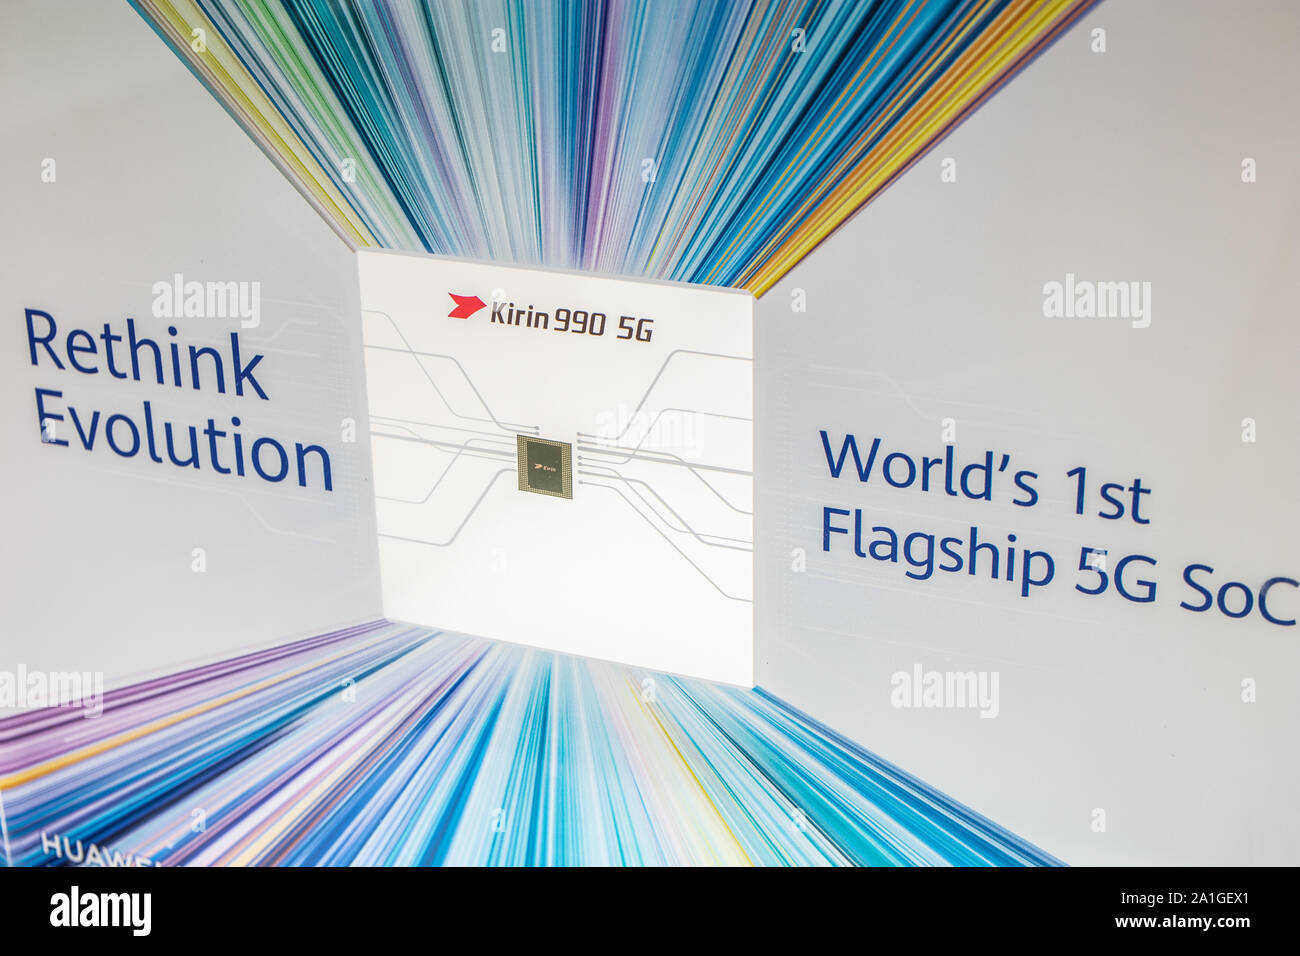 Berlin, Germany, Sep 2019, Kirin 990 5G, world's first Flagship 5g mobile phone SoC Huawei exhibition pavilion, Global Innovations Show IFA 2019 Stock Photo